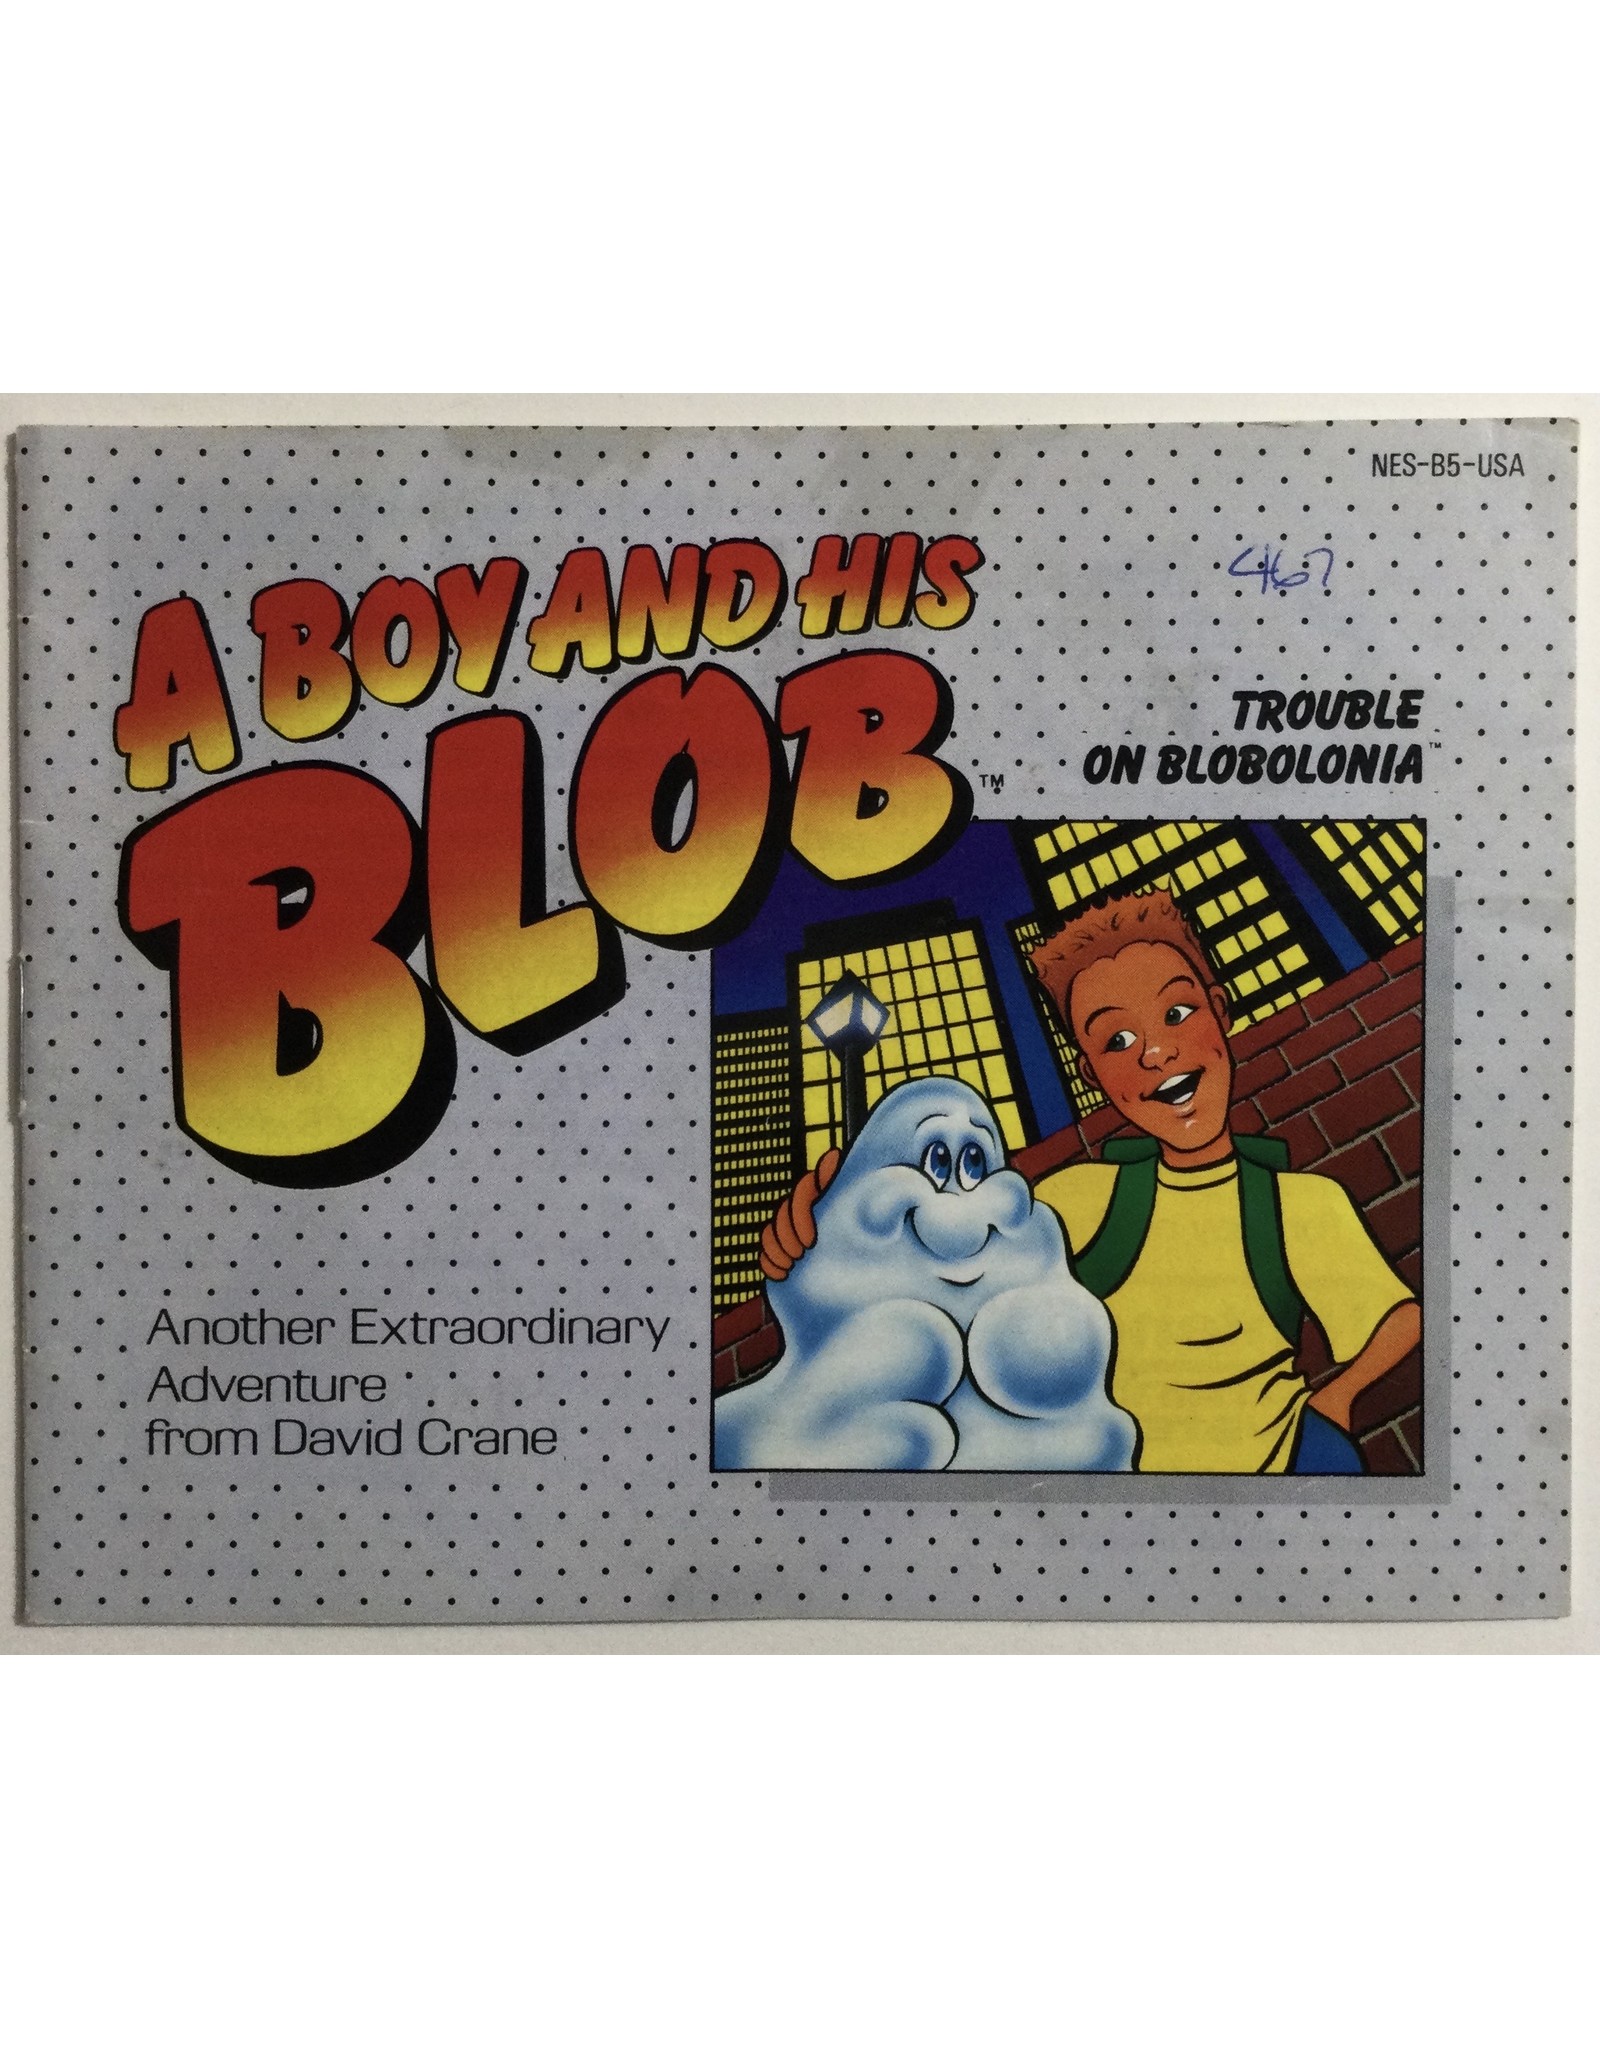 Absolute Entertainment A Boy and His Blob for Nintendo Entertainment system (NES)